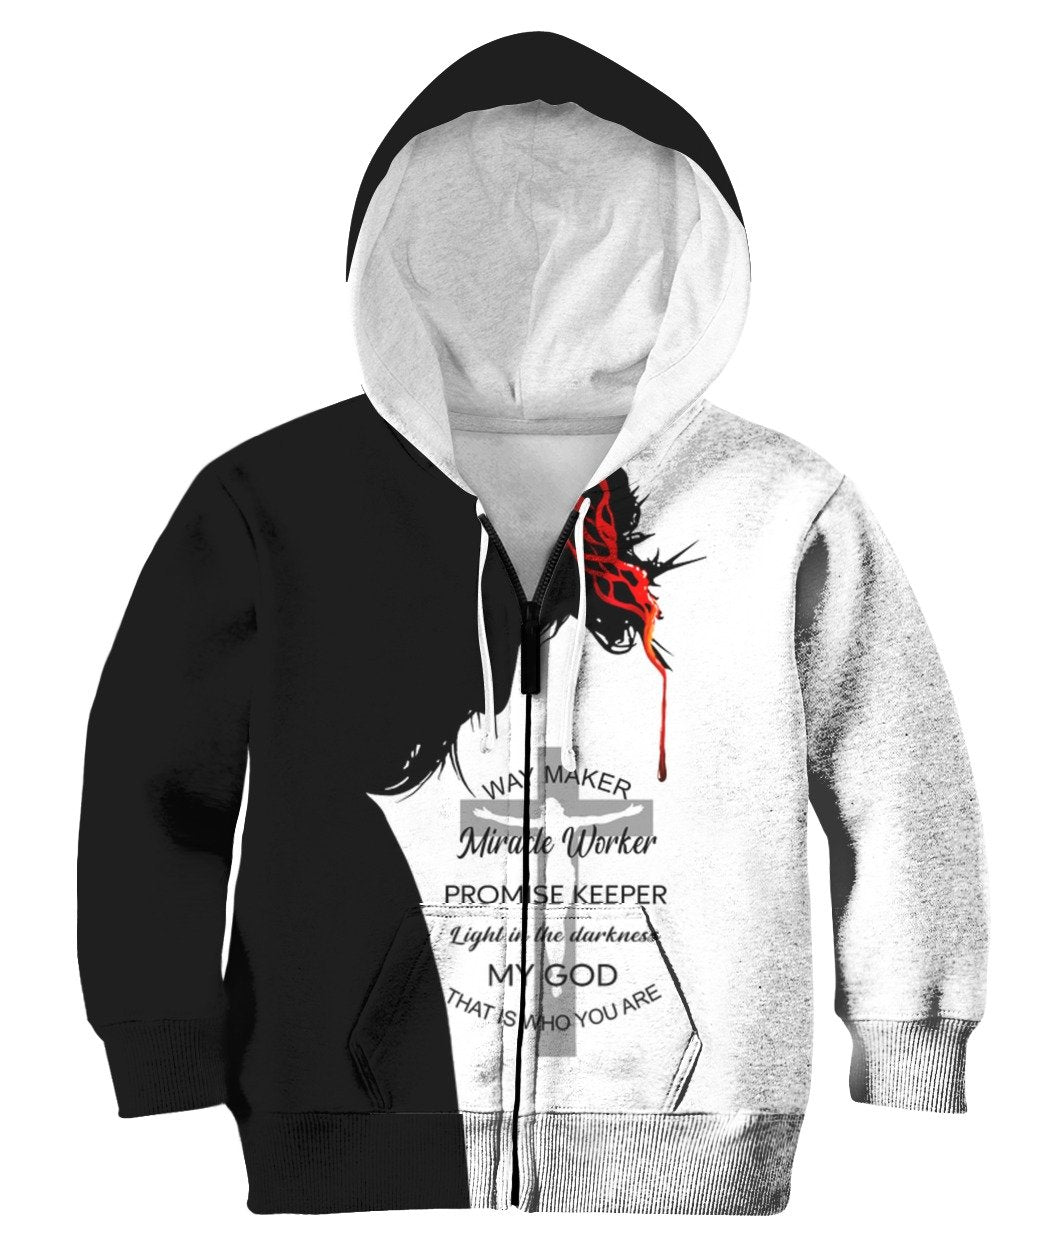 JESUS - WAY MAKER - KID-Apparel-RoosterArt-Zipped Hoodie-YOUTH XS-Vibe Cosy™